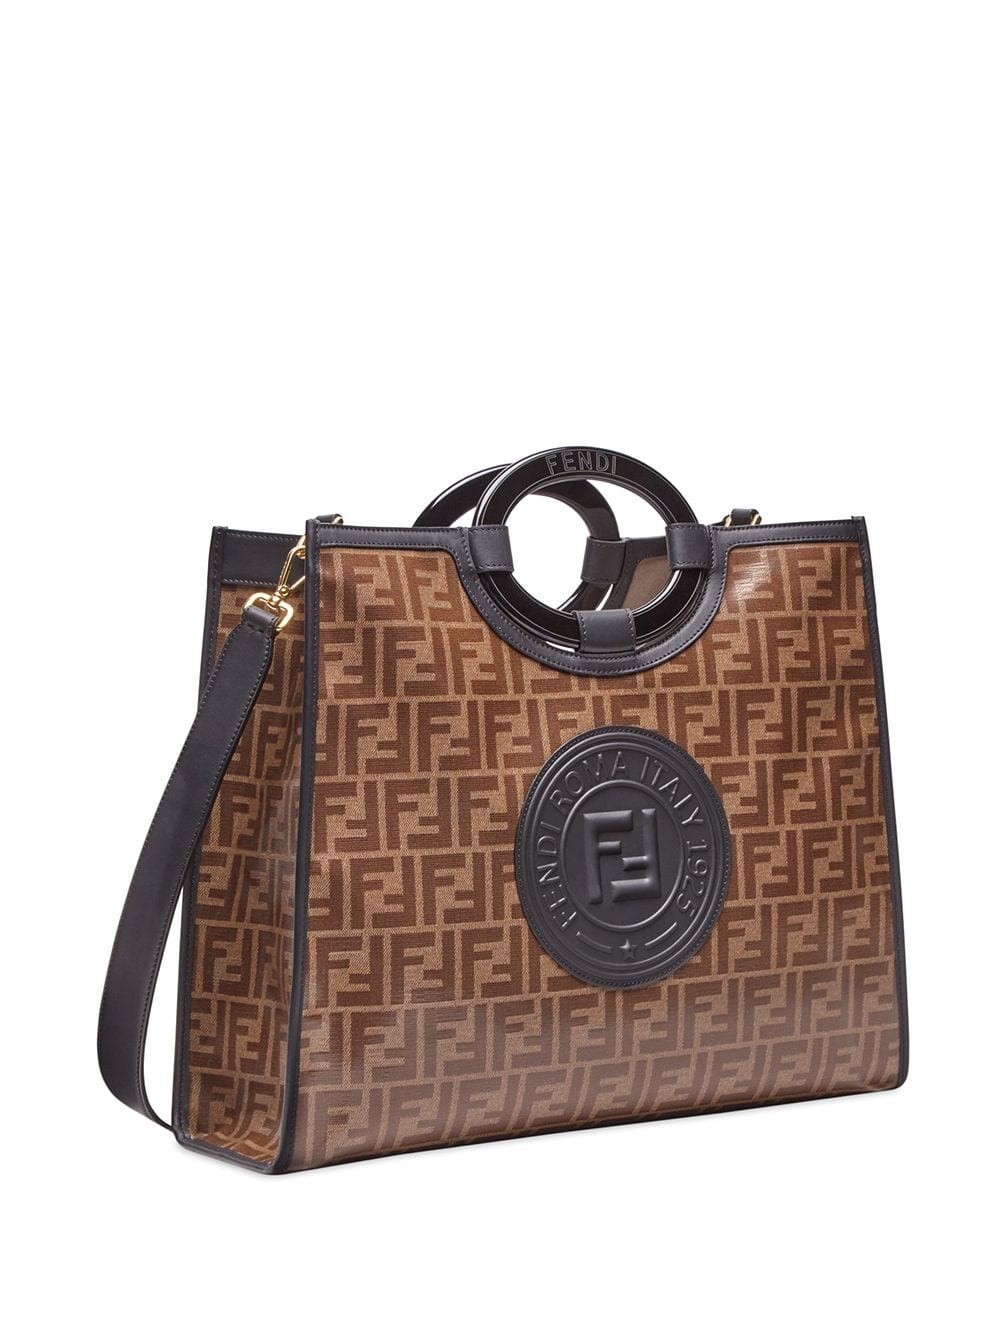 fendi LOGO SHOPPING TOTE available on montiboutique.com - 28890